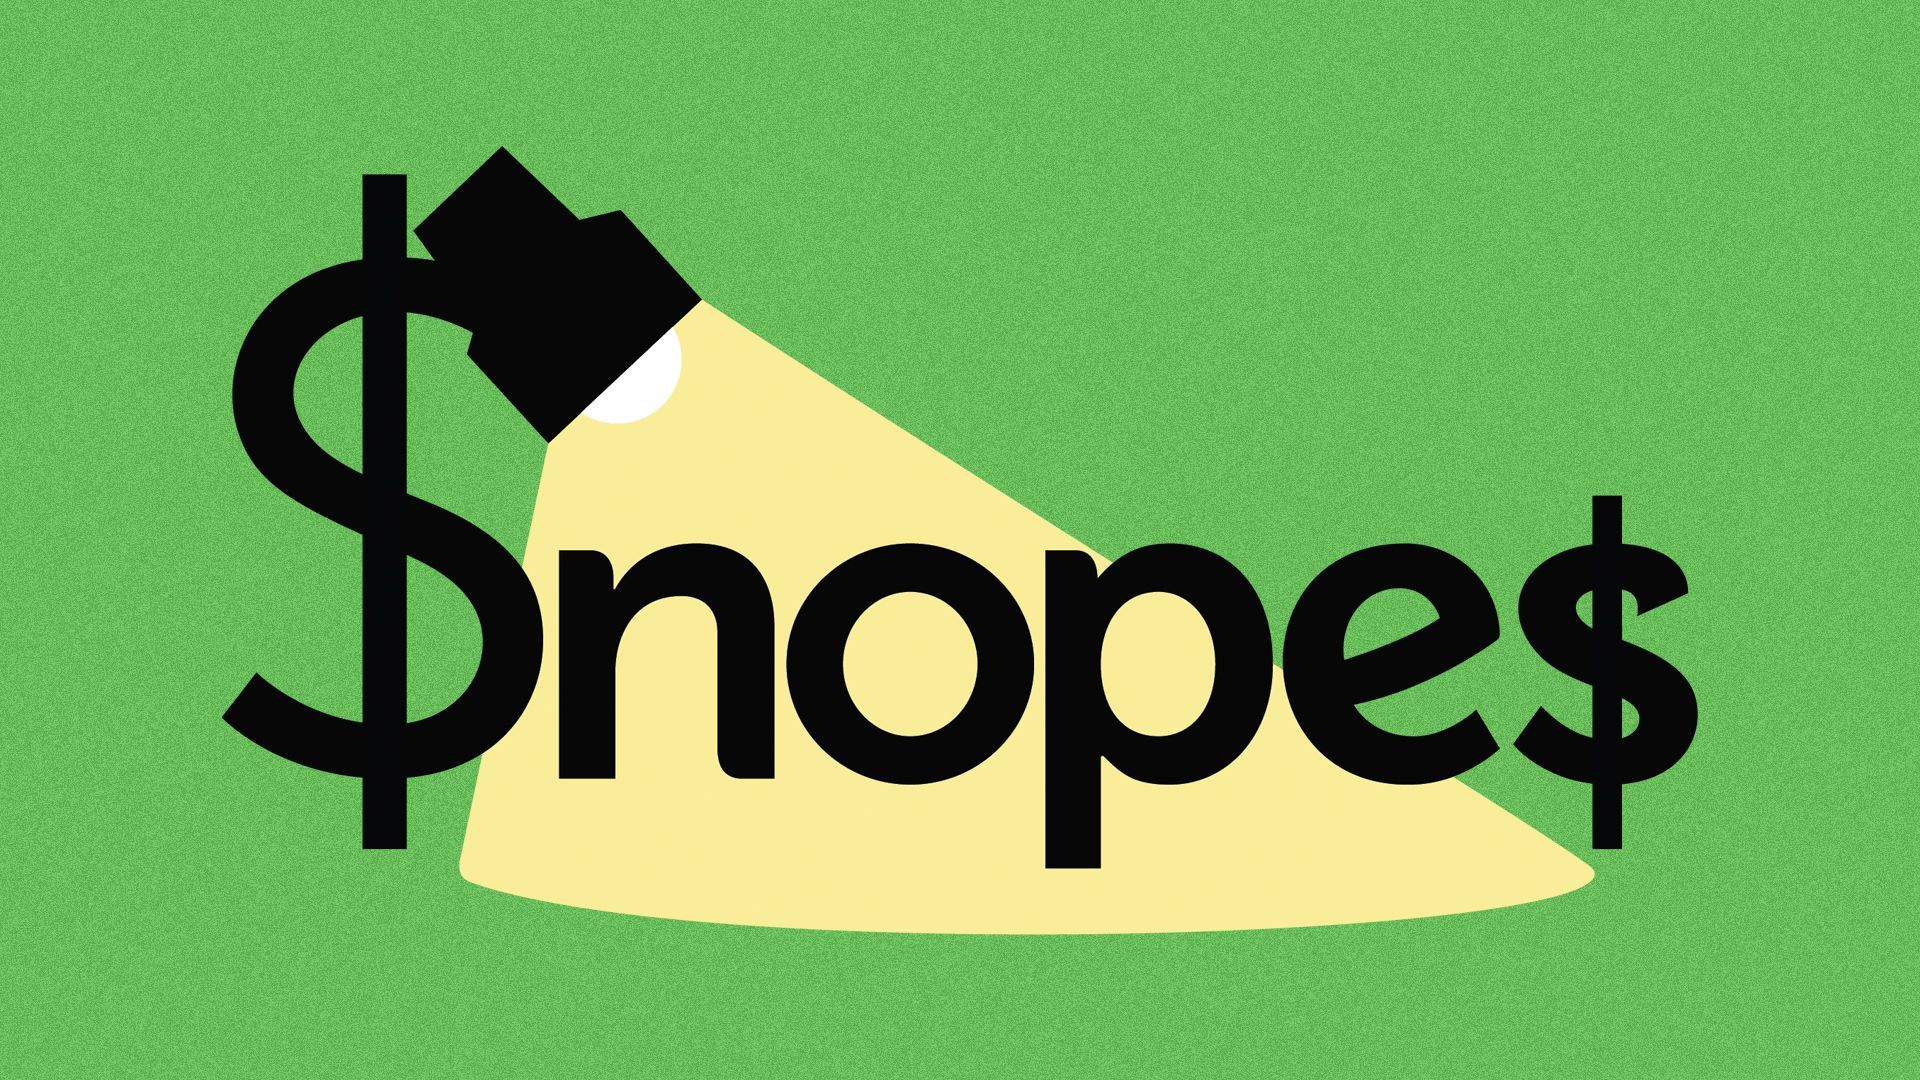 Illustration of the Snopes logo with the s's replaced by dollar signs.